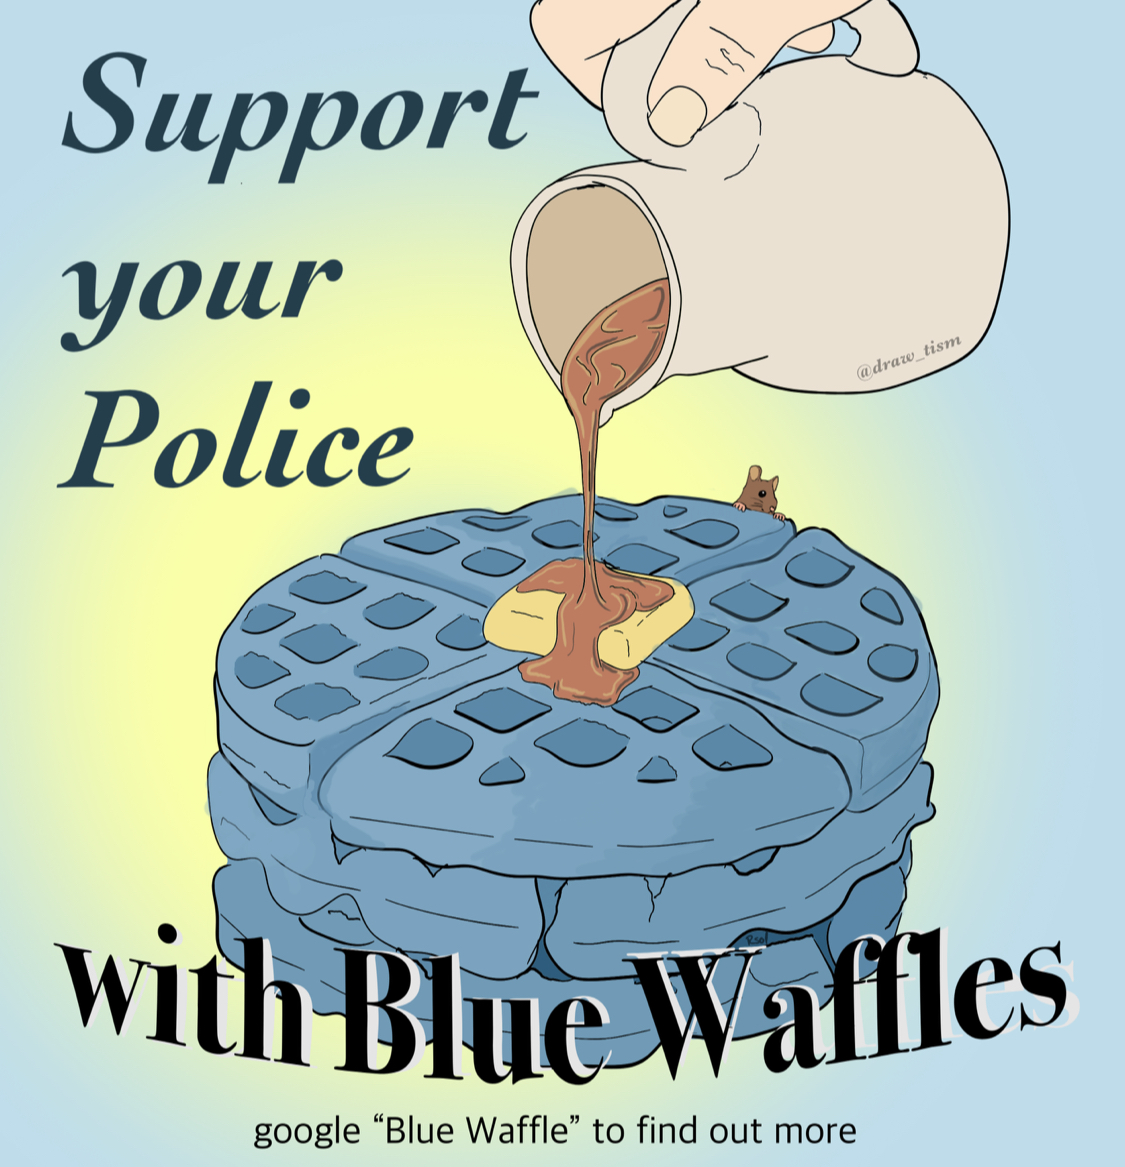 dreamweaver carpet - Supports your Police with Blue Wallies google "Blue Waffle to find out more